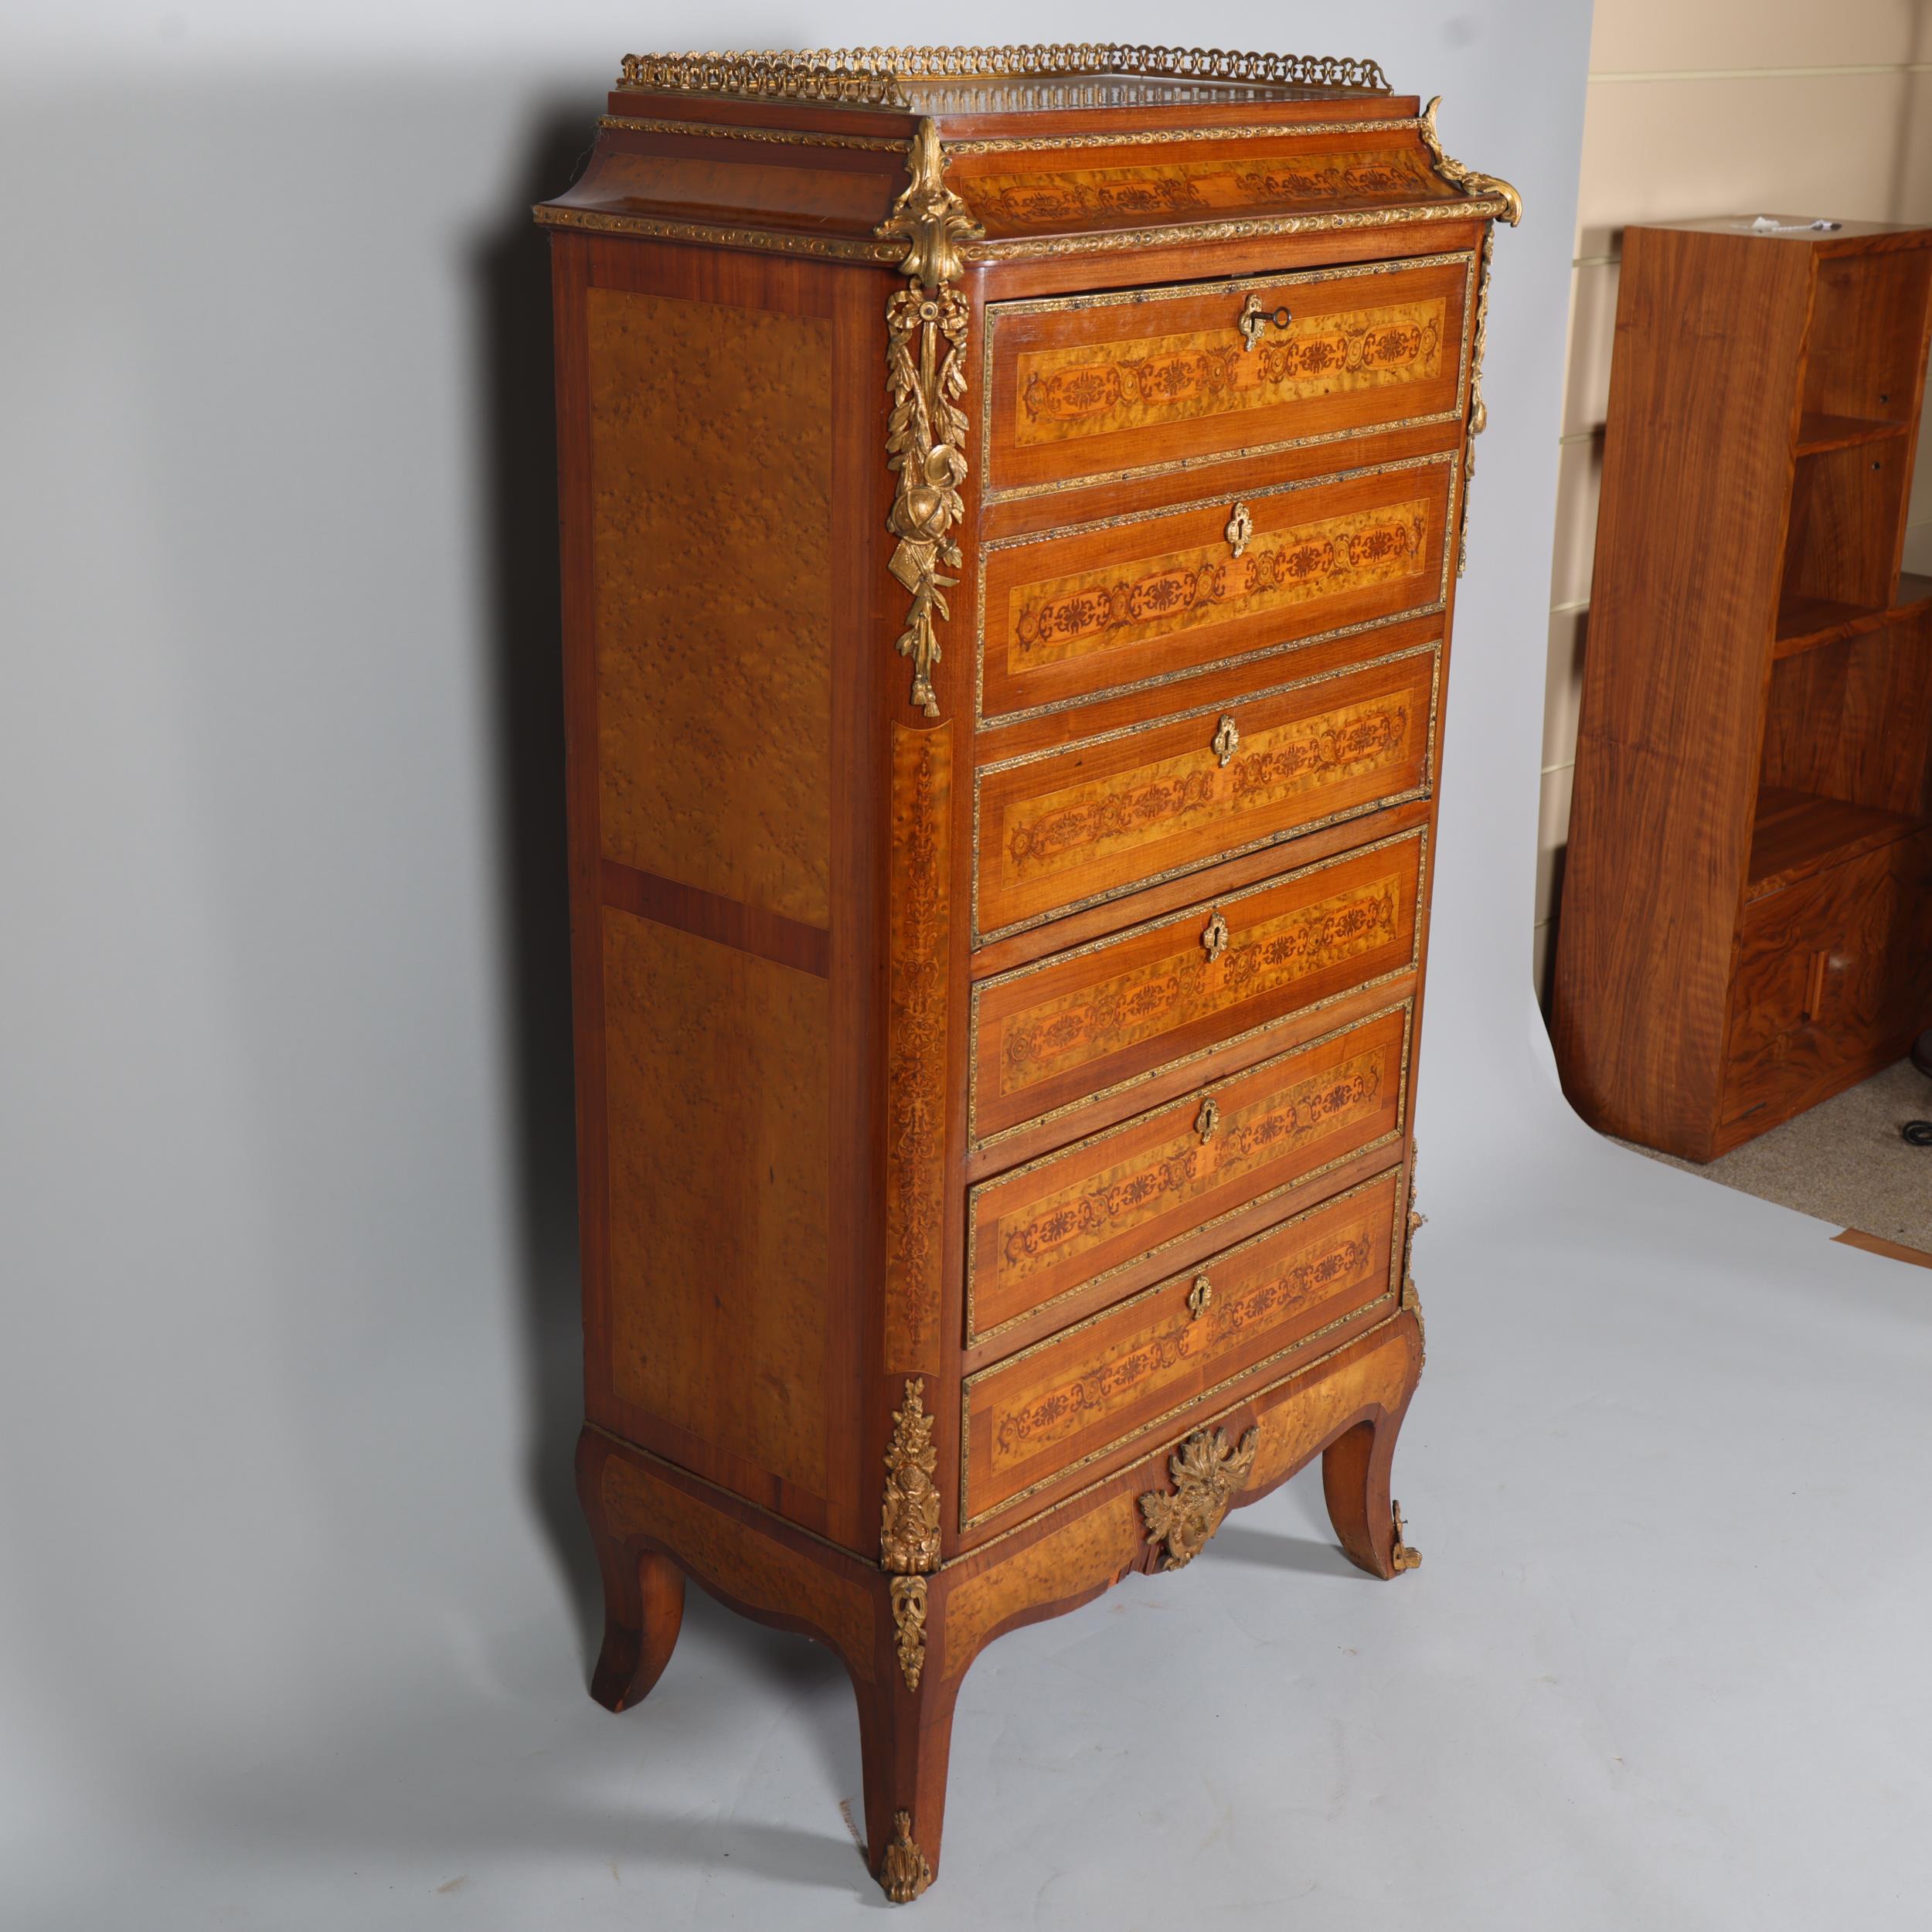 An ornate French mahogany and marquetry inlaid writing cabinet, circa 1900, brass galleried top with - Image 3 of 7